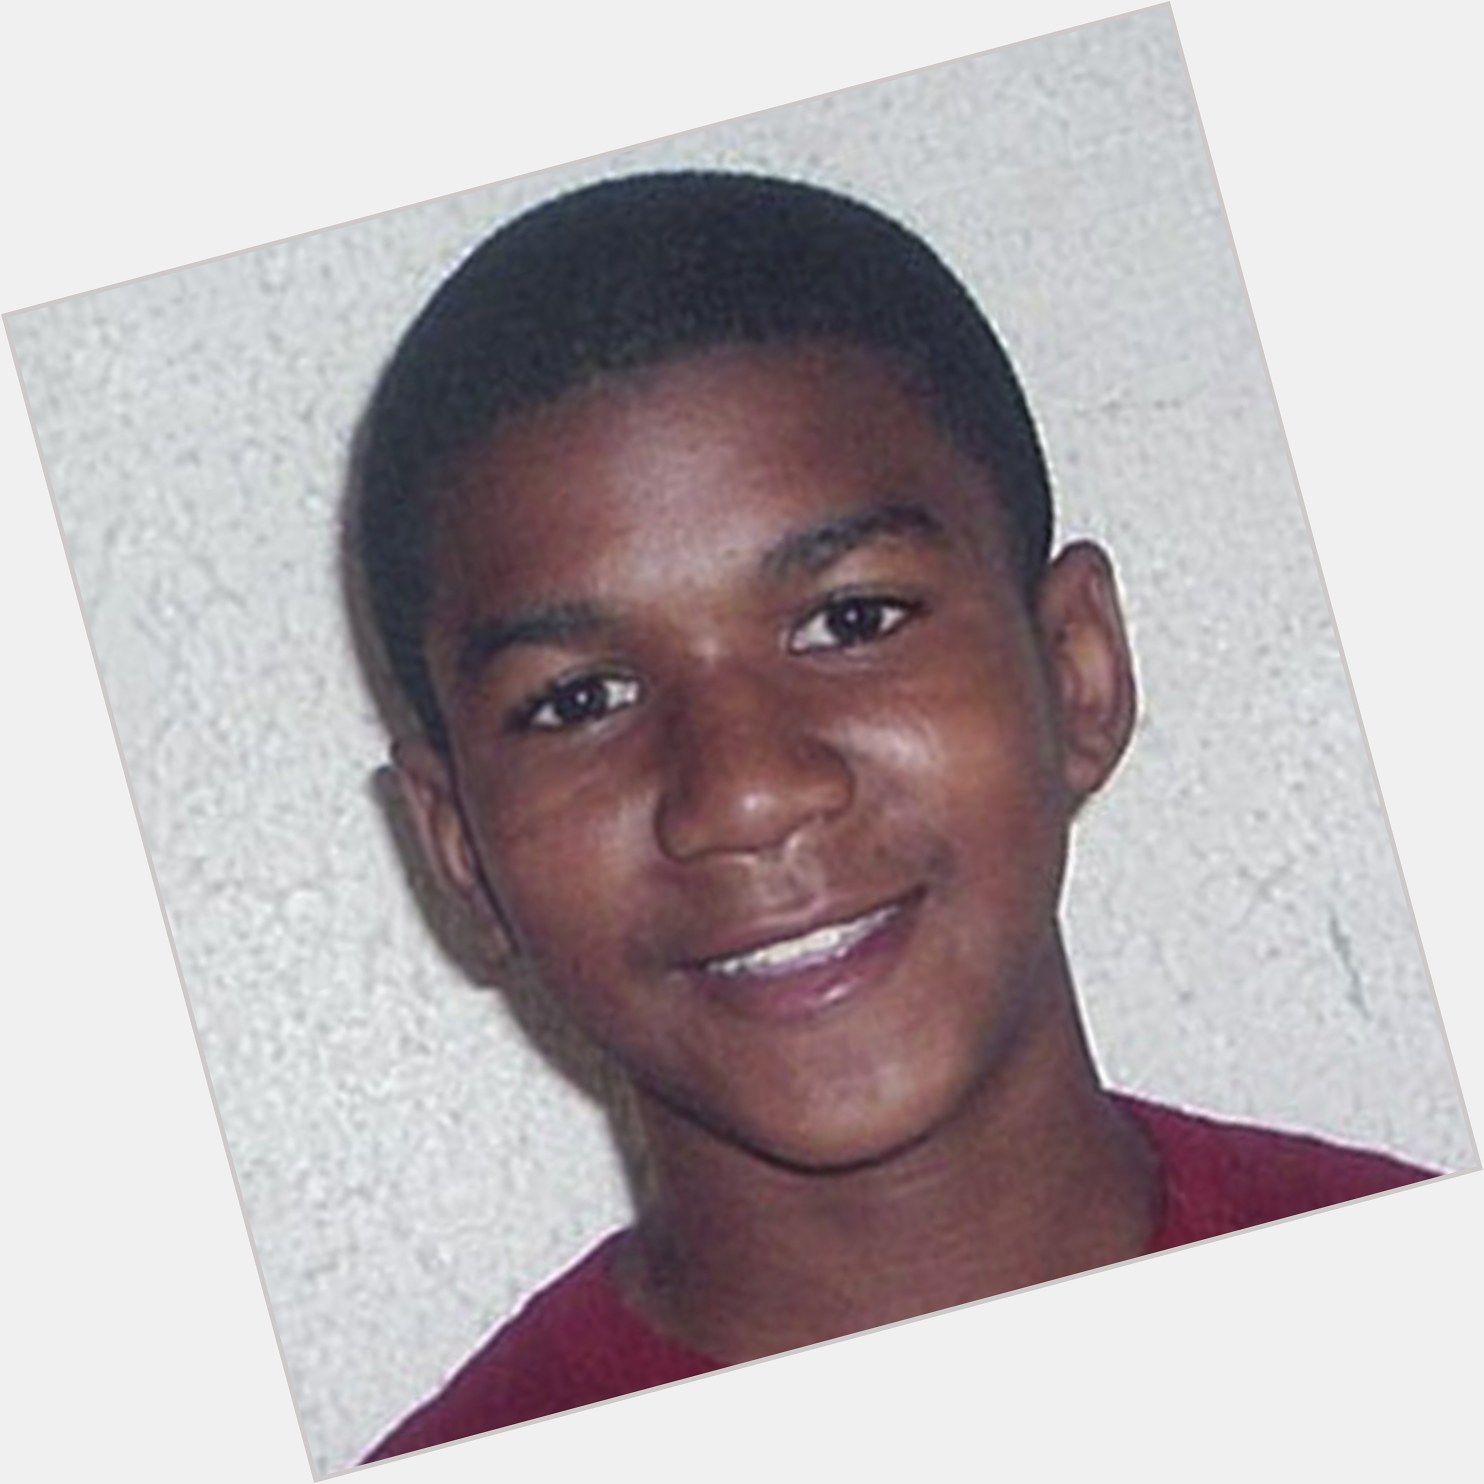 Happy birthday Trayvon Martin! You were taken from us too soon. 

Trayvon would have turned 25 today. 